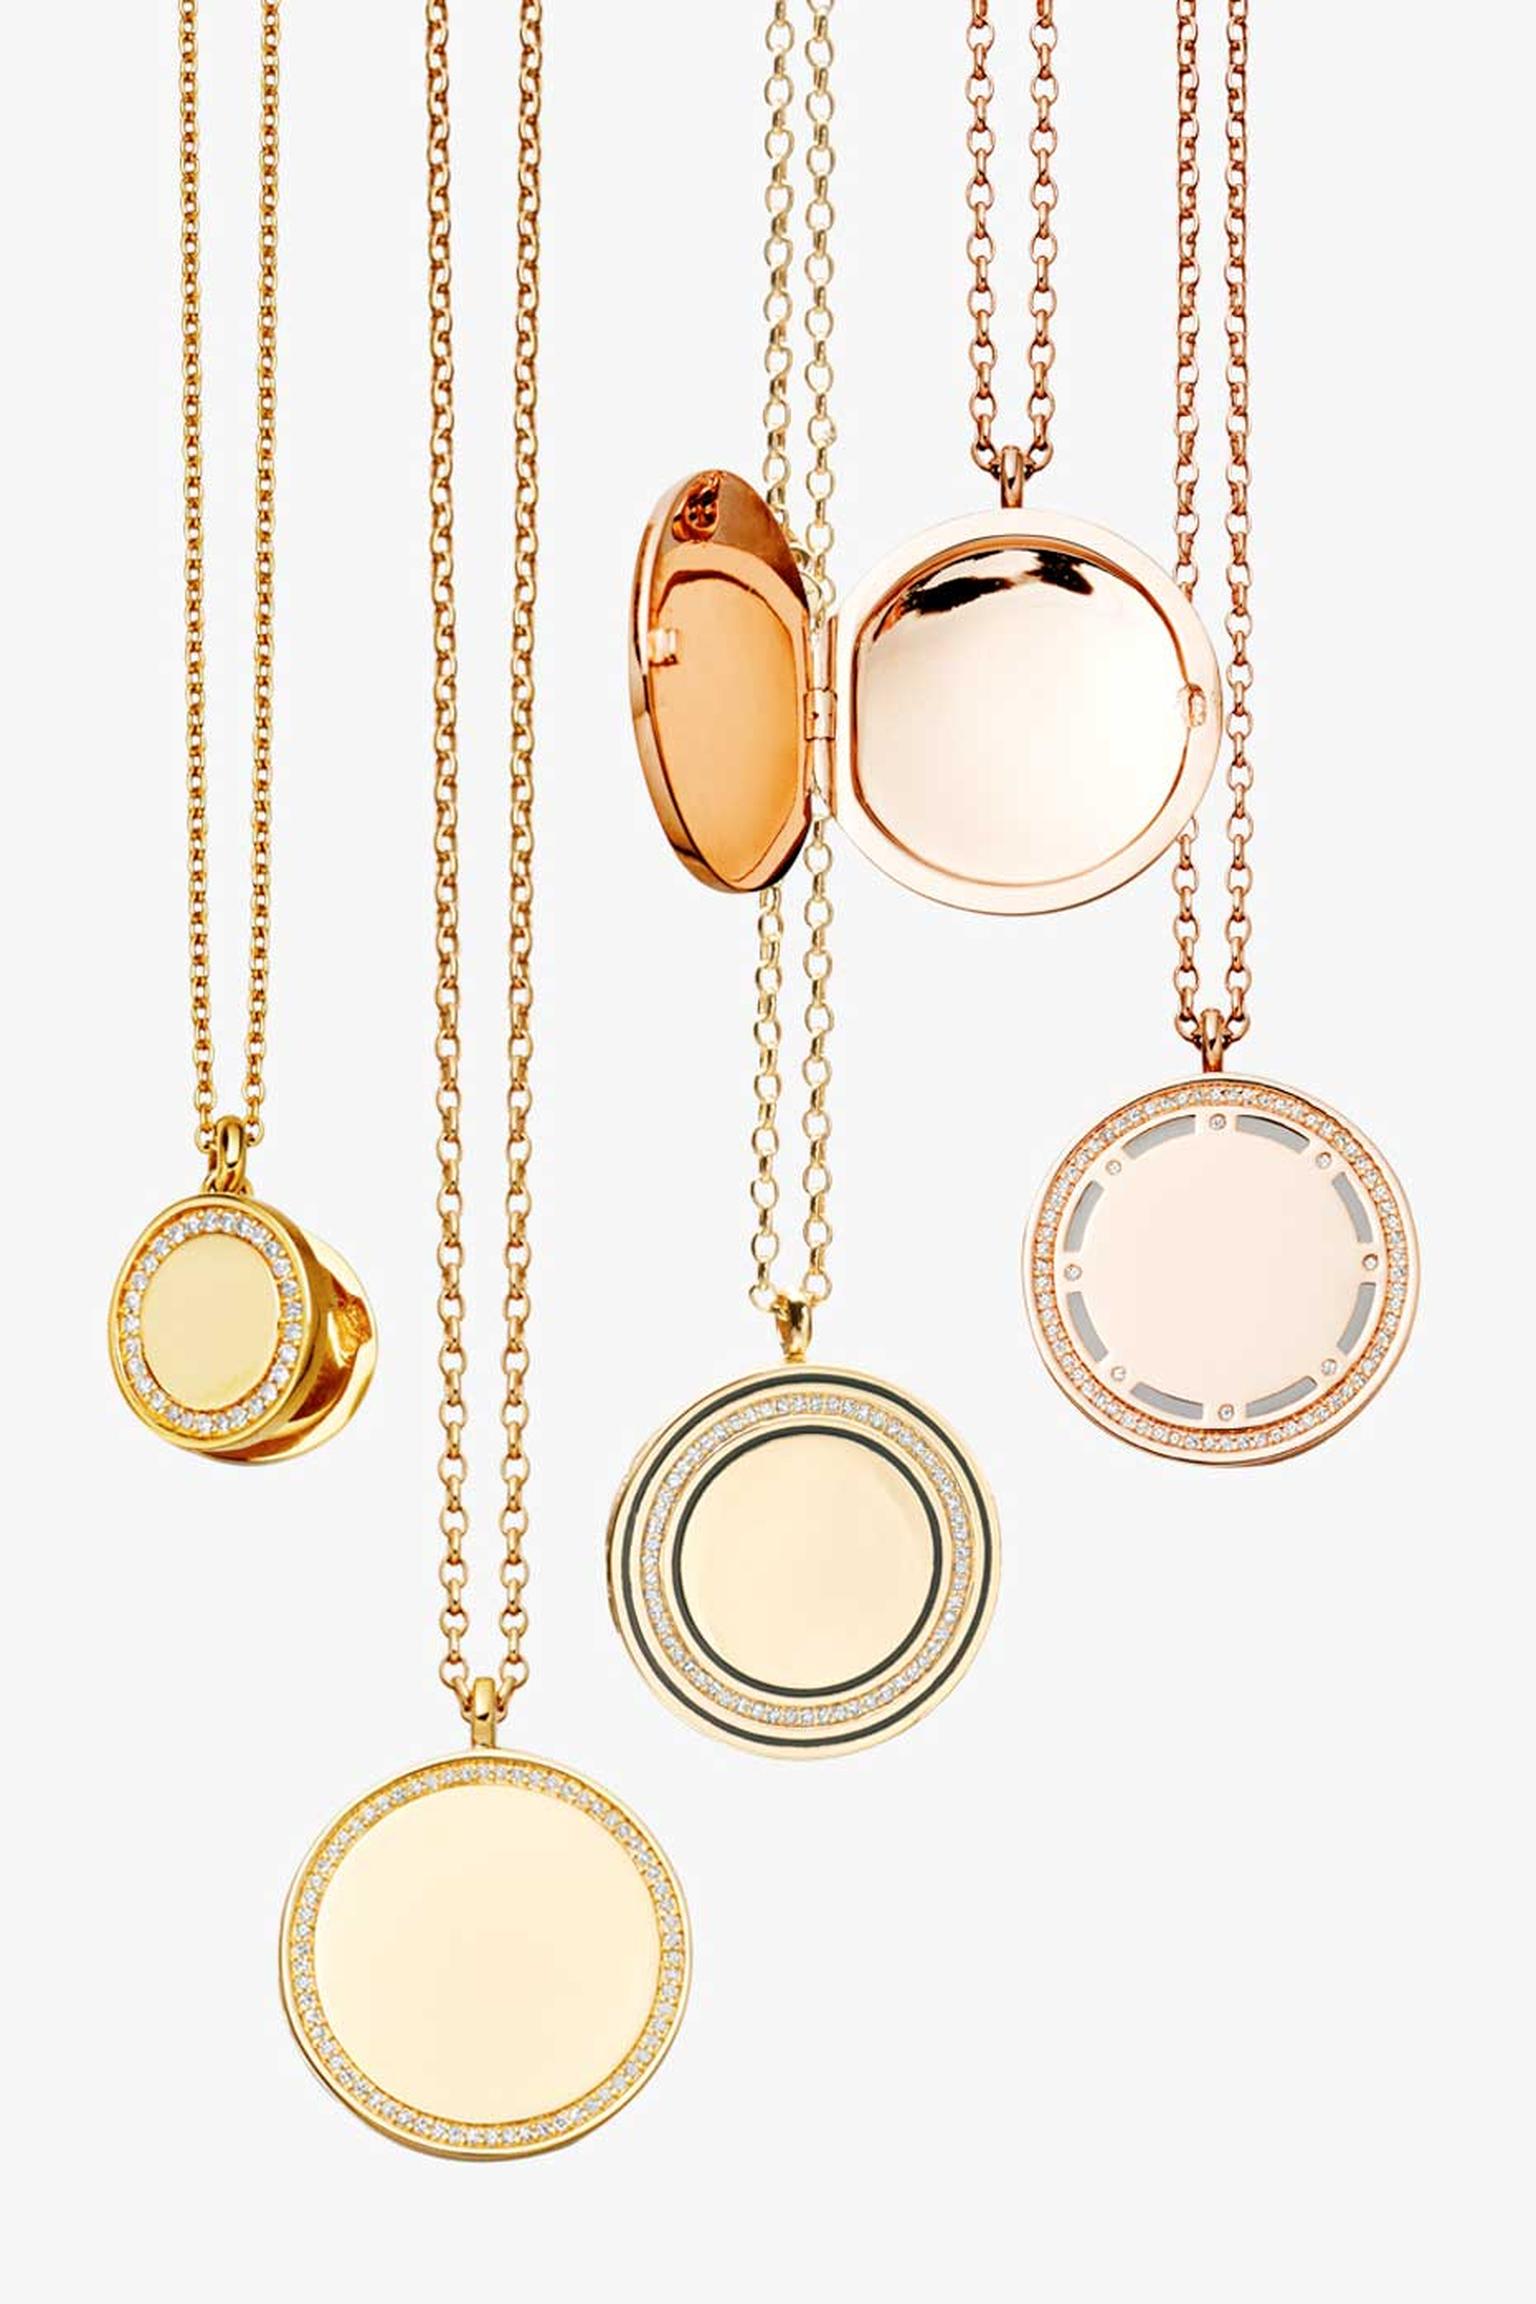 Designed in-house at the Astley Clarke London Design Studio, their newest collection of Cosmos lockets feature either rose or yellow gold, with diamonds and hand enamelling. The collection also includes rings and small pendants which all add the perfect t